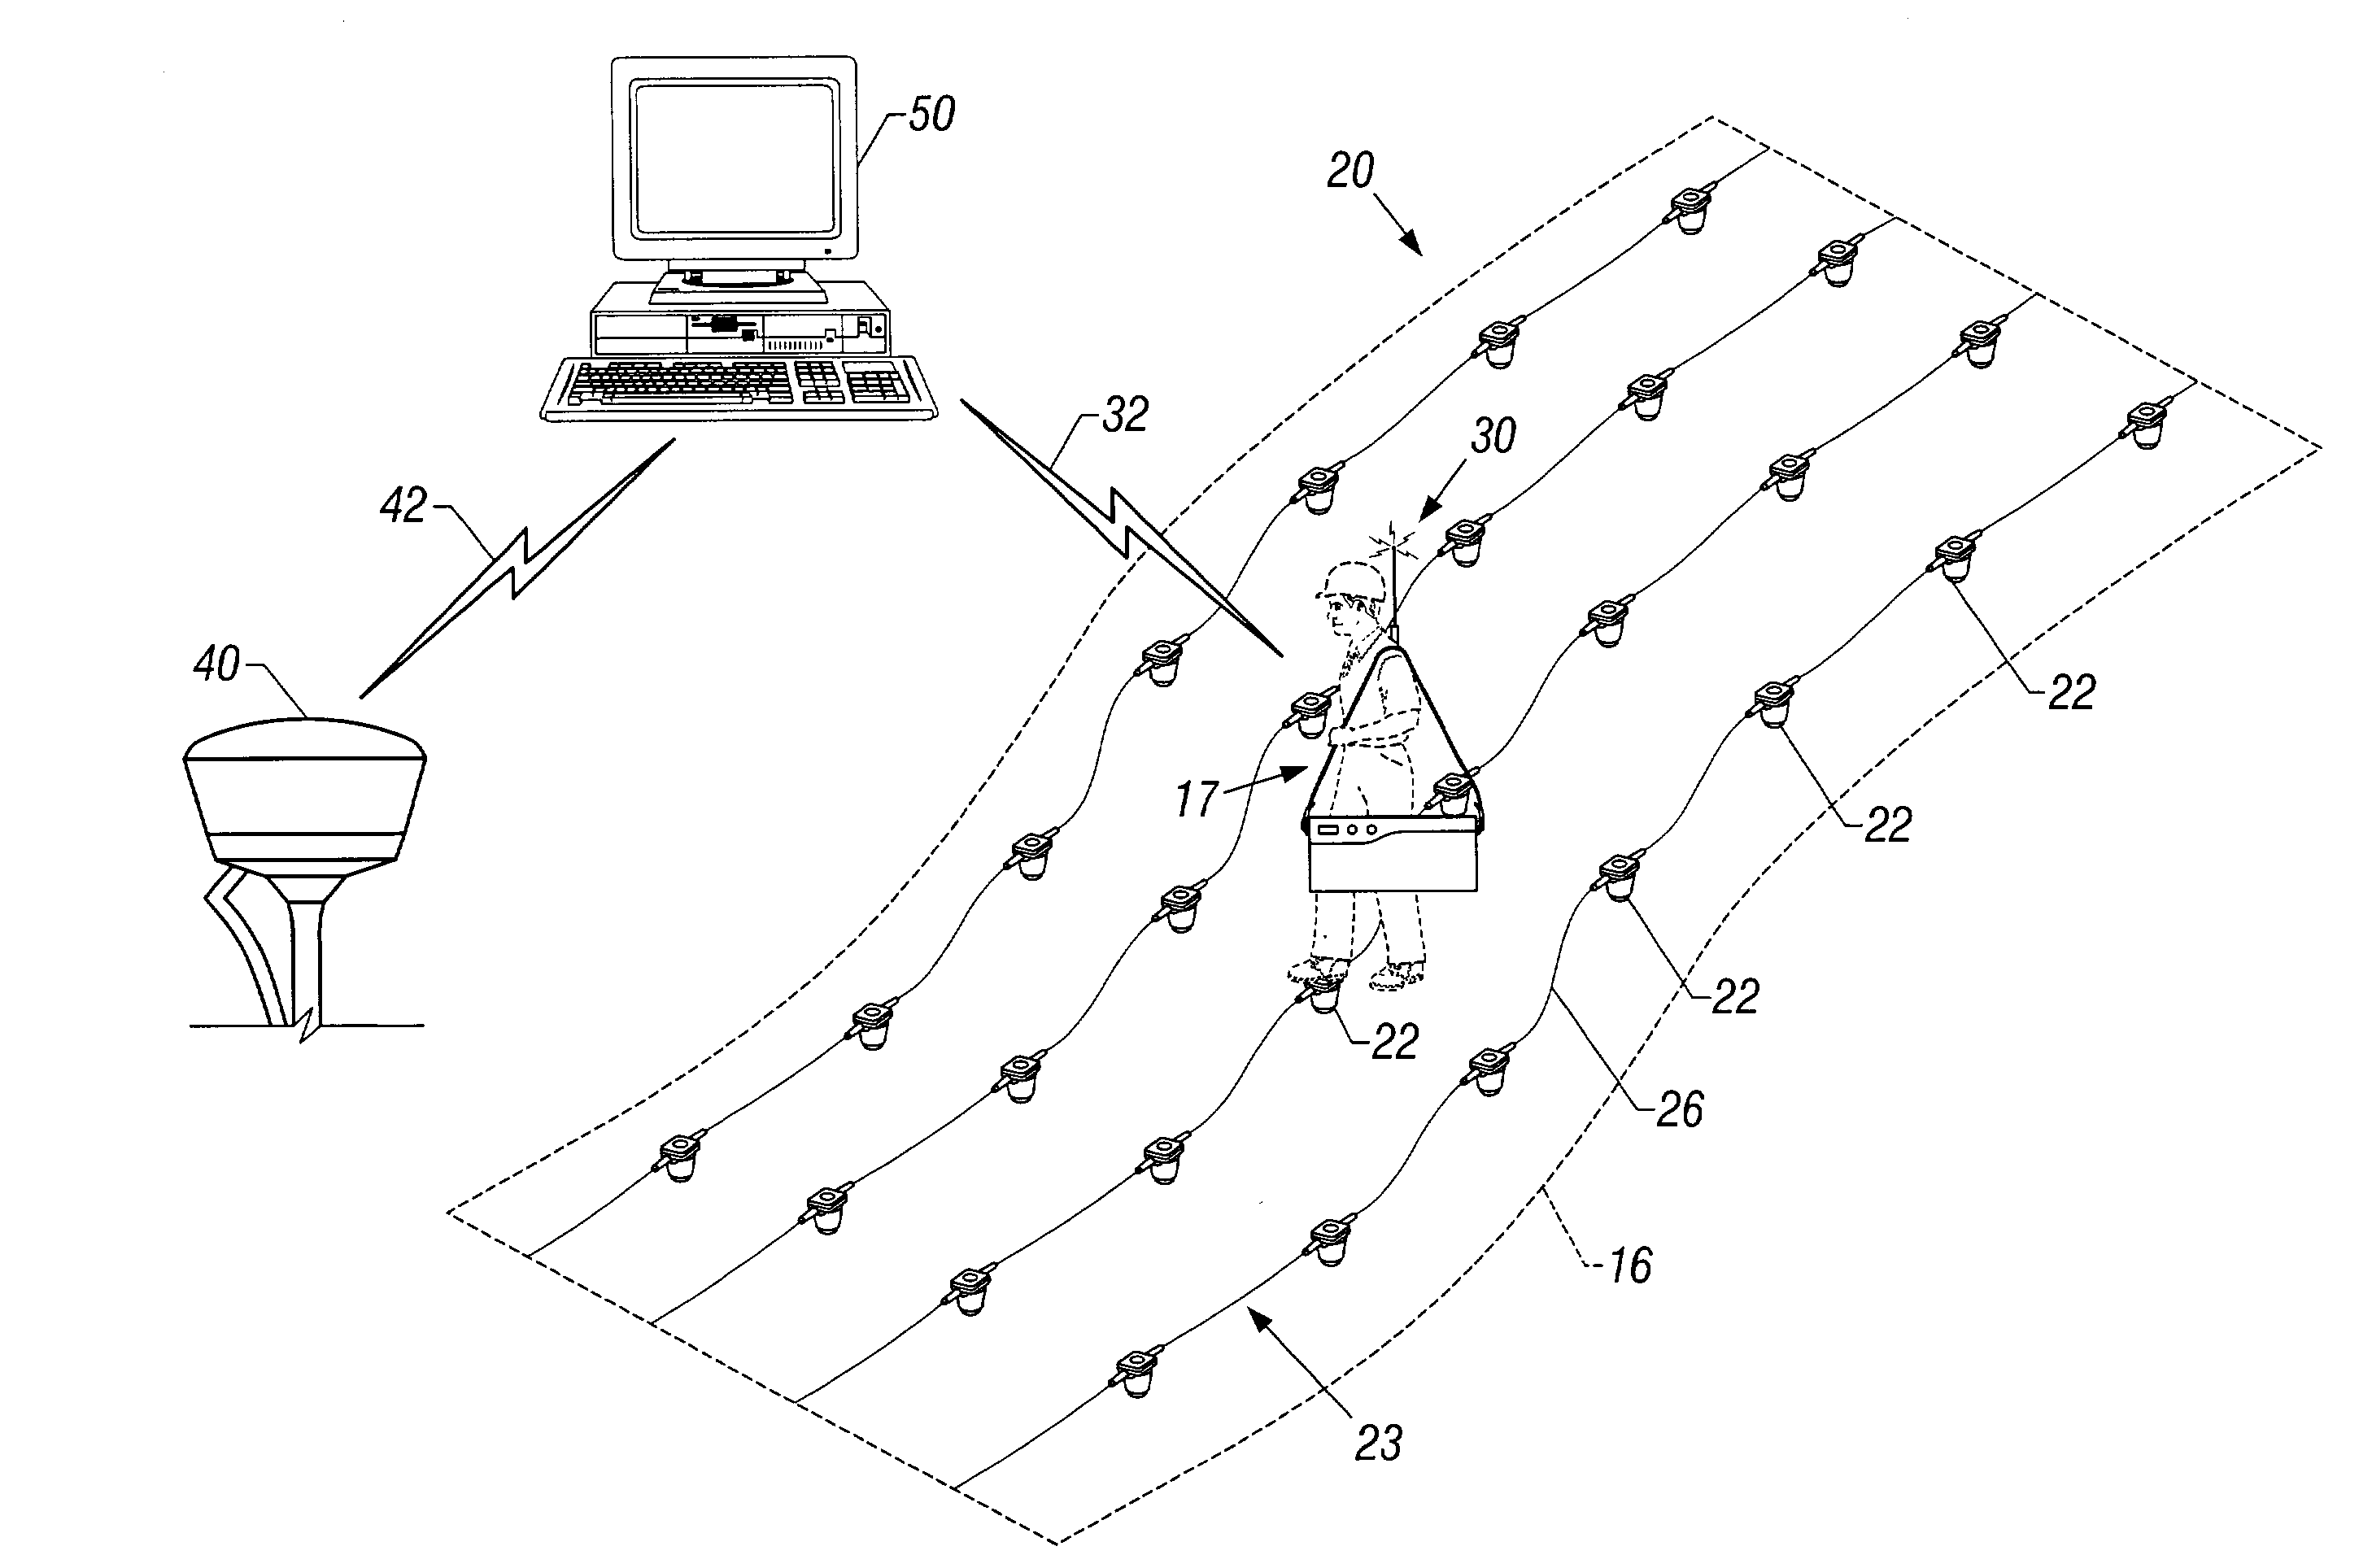 Method of accurately determining positions of deployed seismic geophones